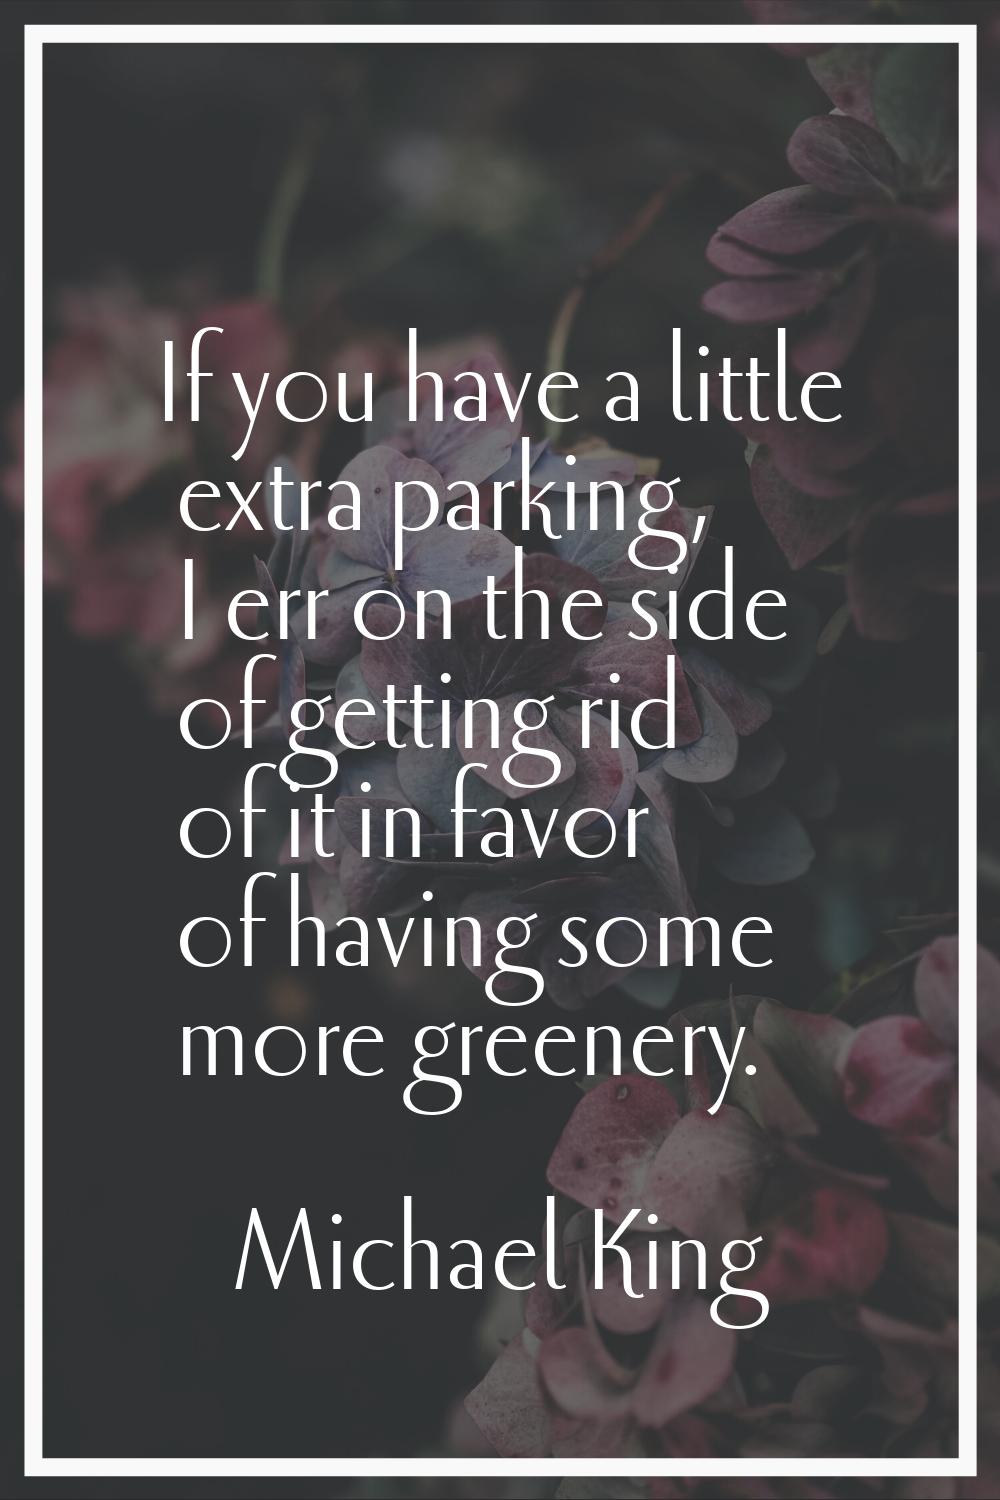 If you have a little extra parking, I err on the side of getting rid of it in favor of having some 